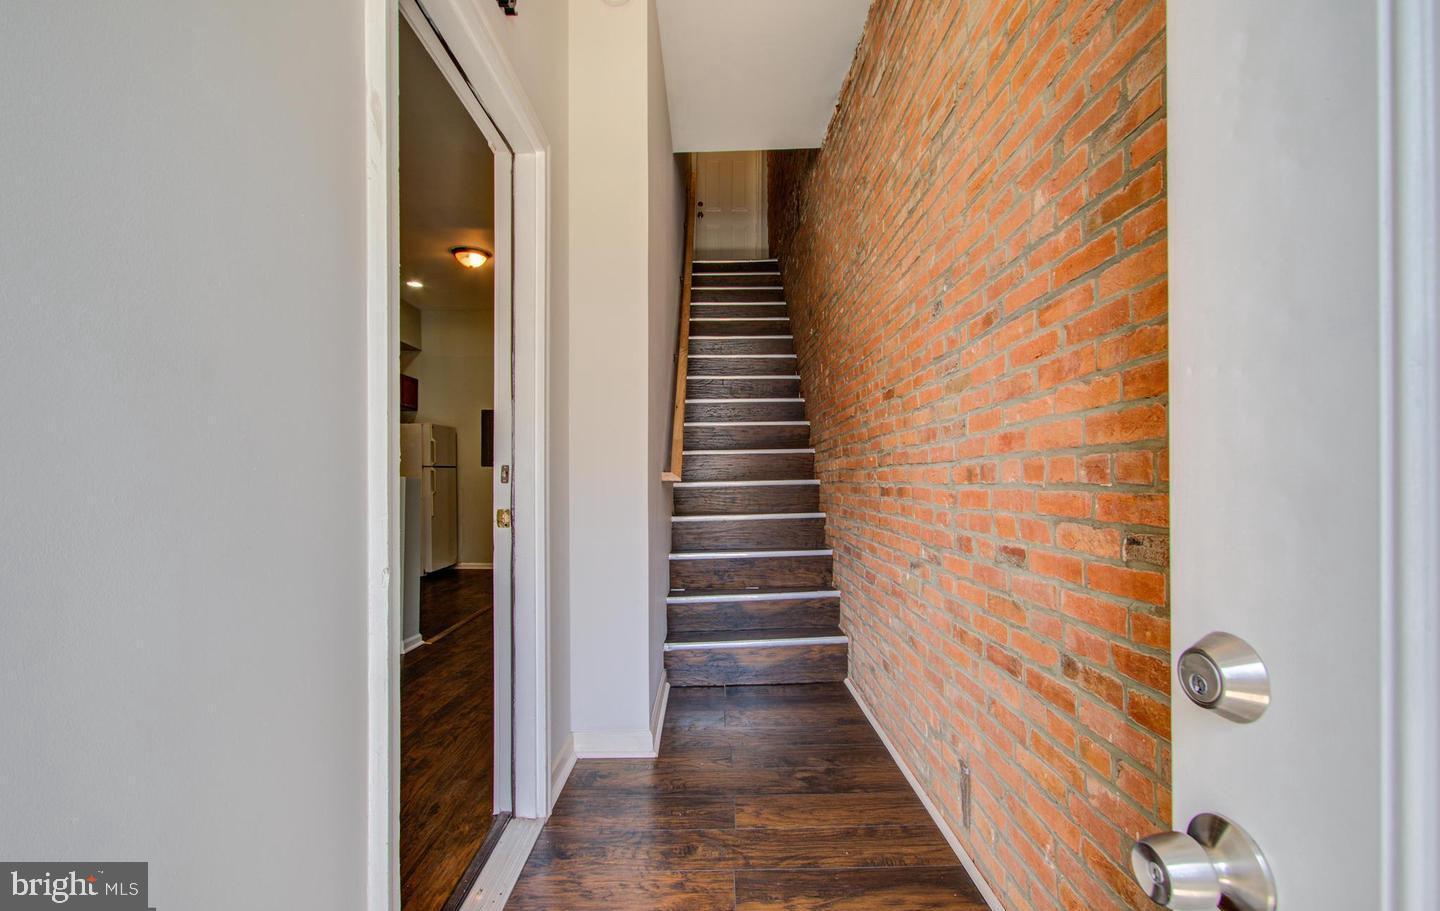 a view of a hallway with stairs and wooden floor